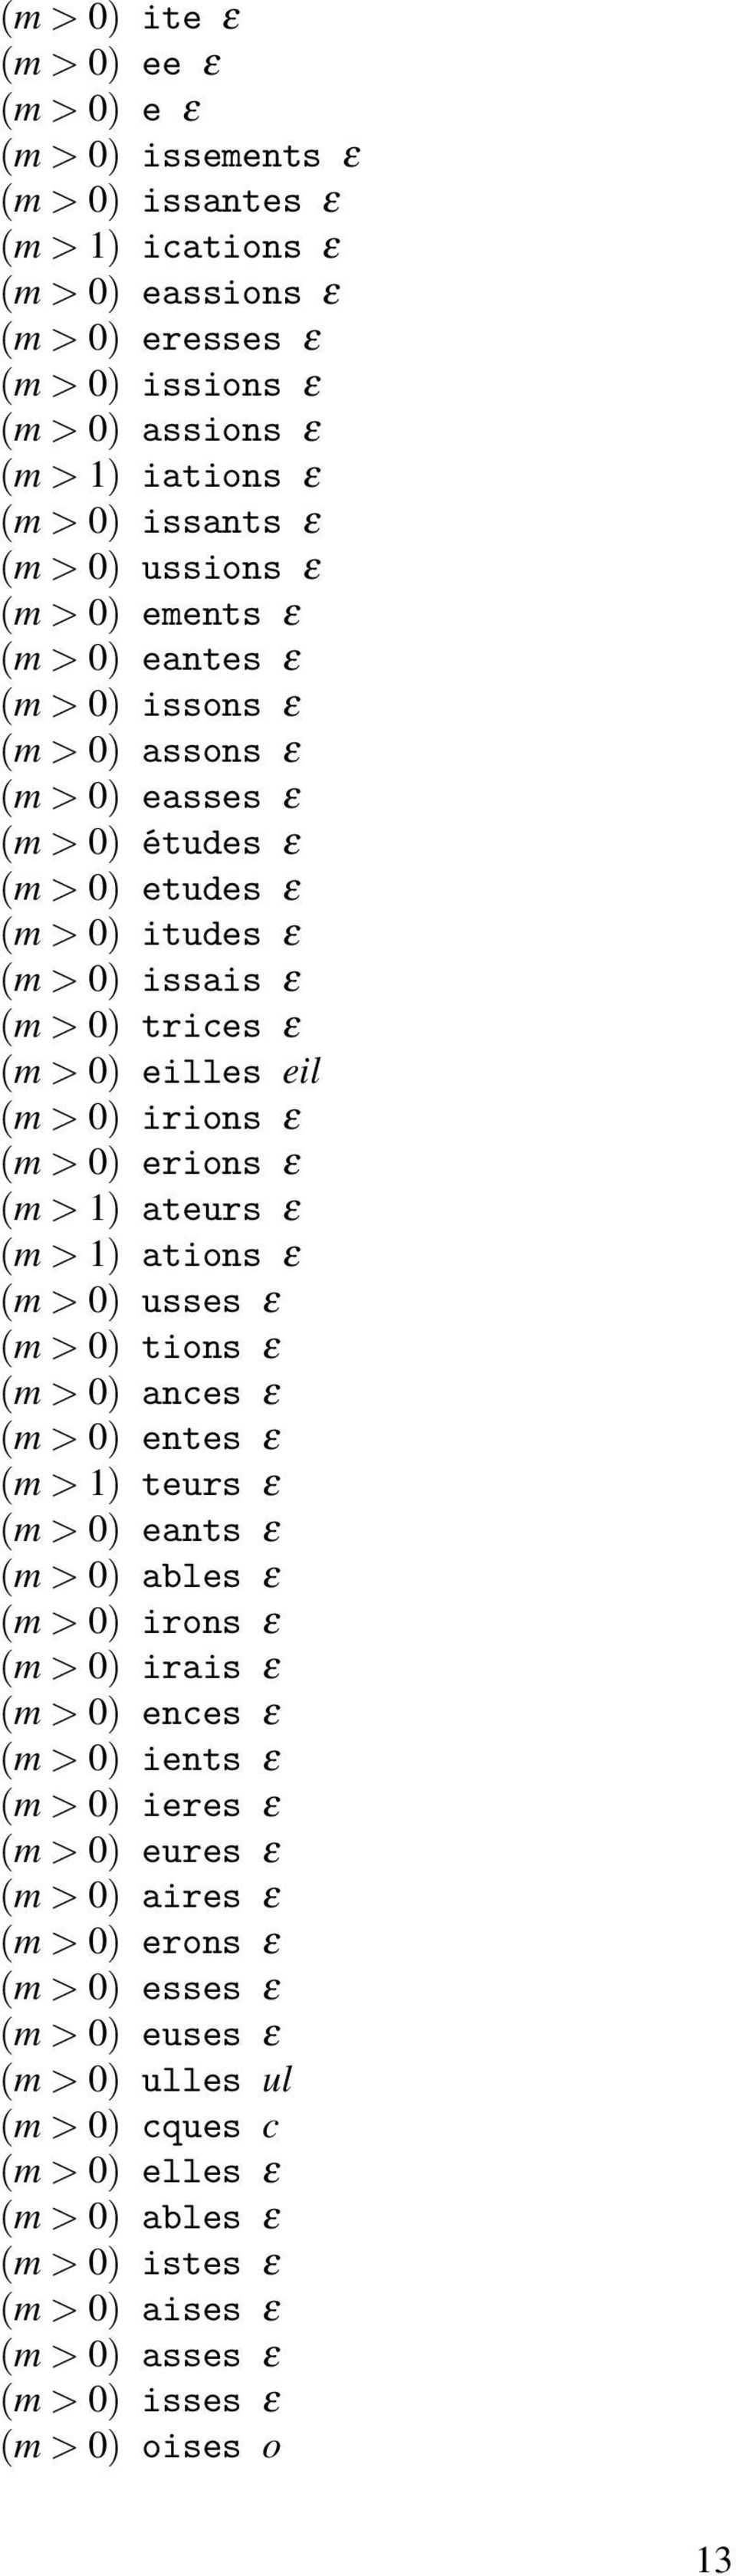 (m > 0) eilles eil (m > 0) irions ε (m > 0) erions ε (m > 1) ateurs ε (m > 1) ations ε (m > 0) usses ε (m > 0) tions ε (m > 0) ances ε (m > 0) entes ε (m > 1) teurs ε (m > 0) eants ε (m > 0) ables ε